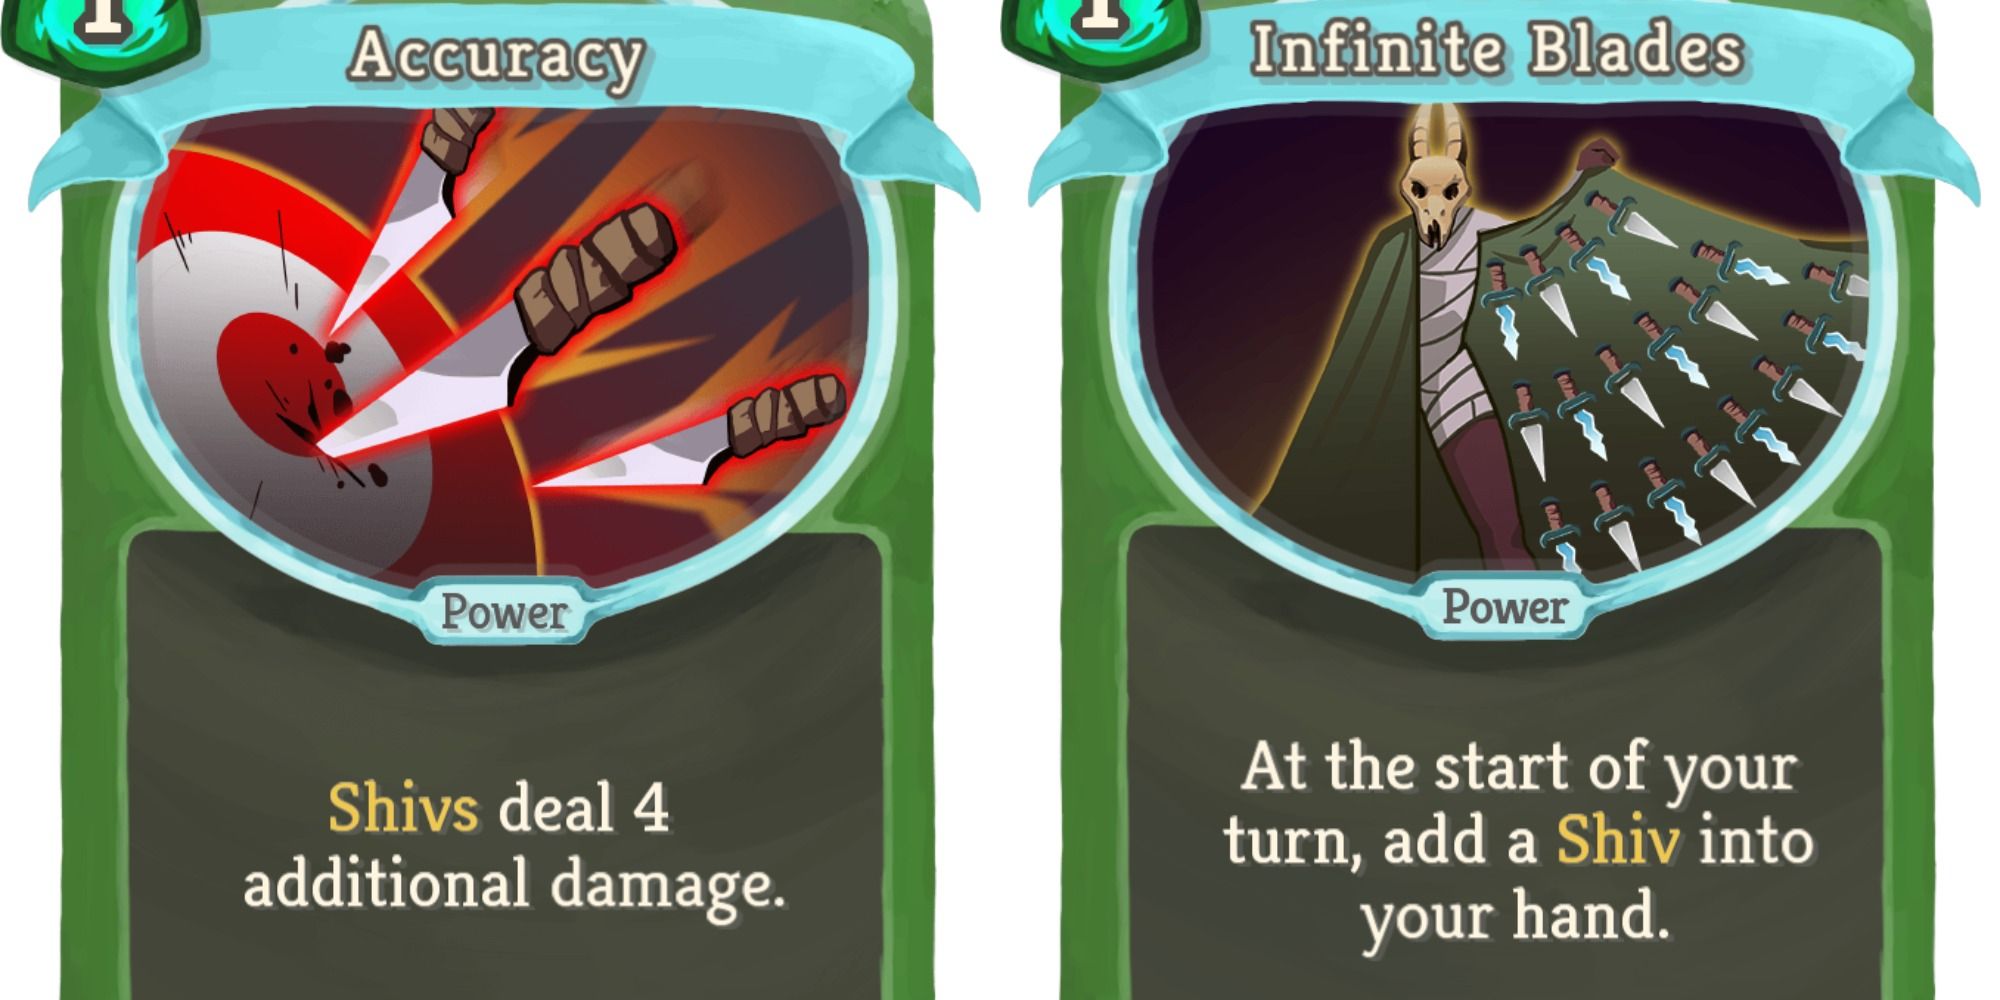 Split image showing the Accuracy and Infinite Blades cards in Slay the Spire